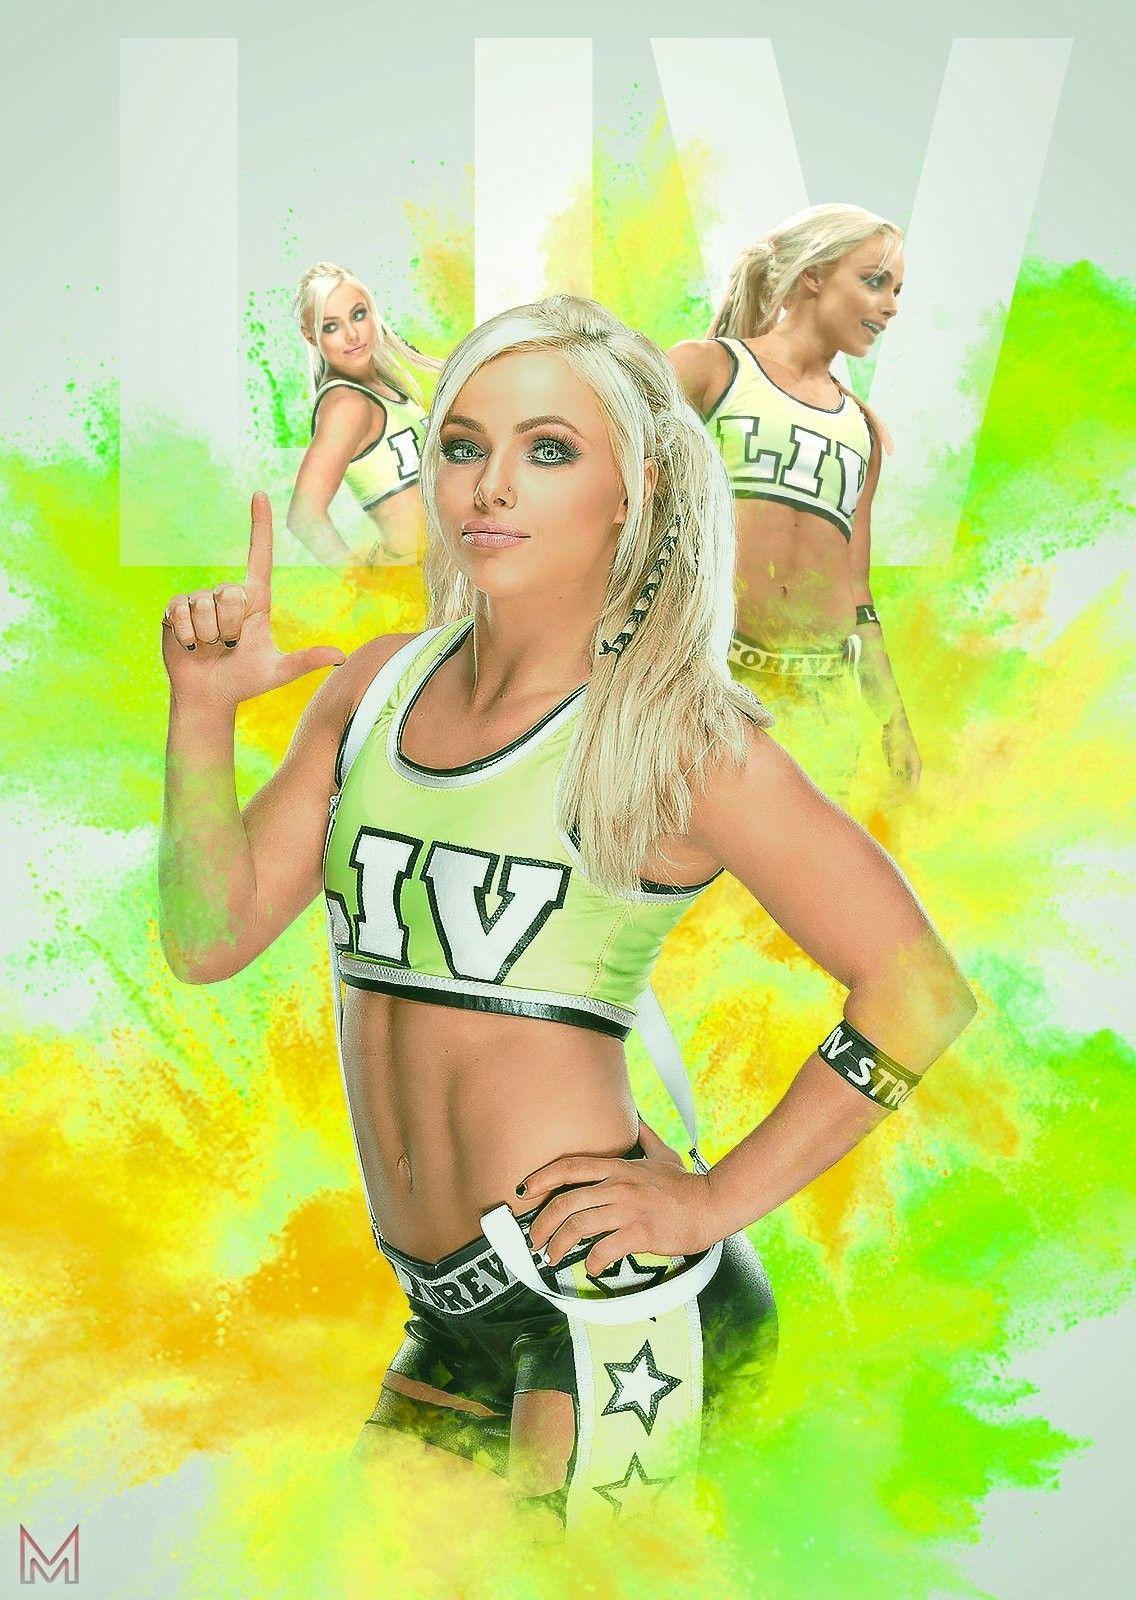   Liv Morgan Wallpapers Requests Are Open